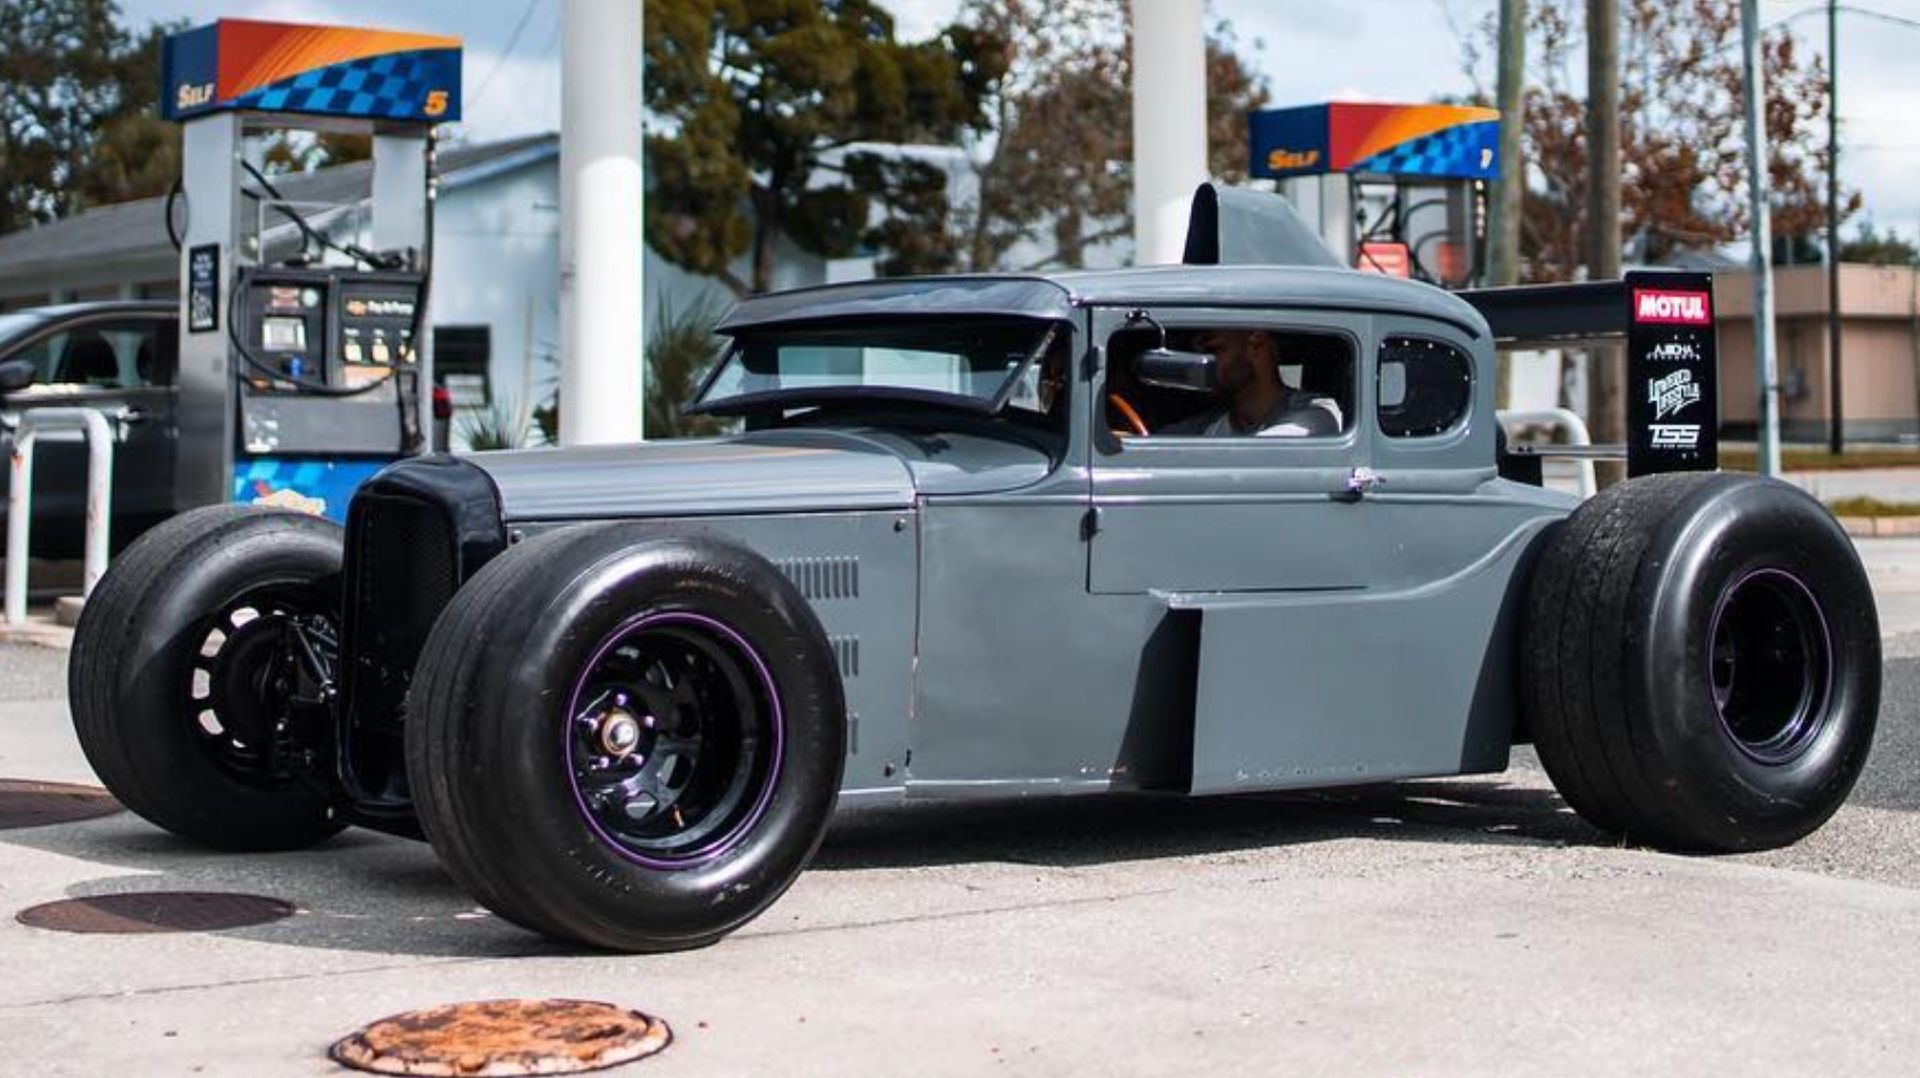 Gray 1930 Ford Model A F1 Hot Rod At A Gas Station